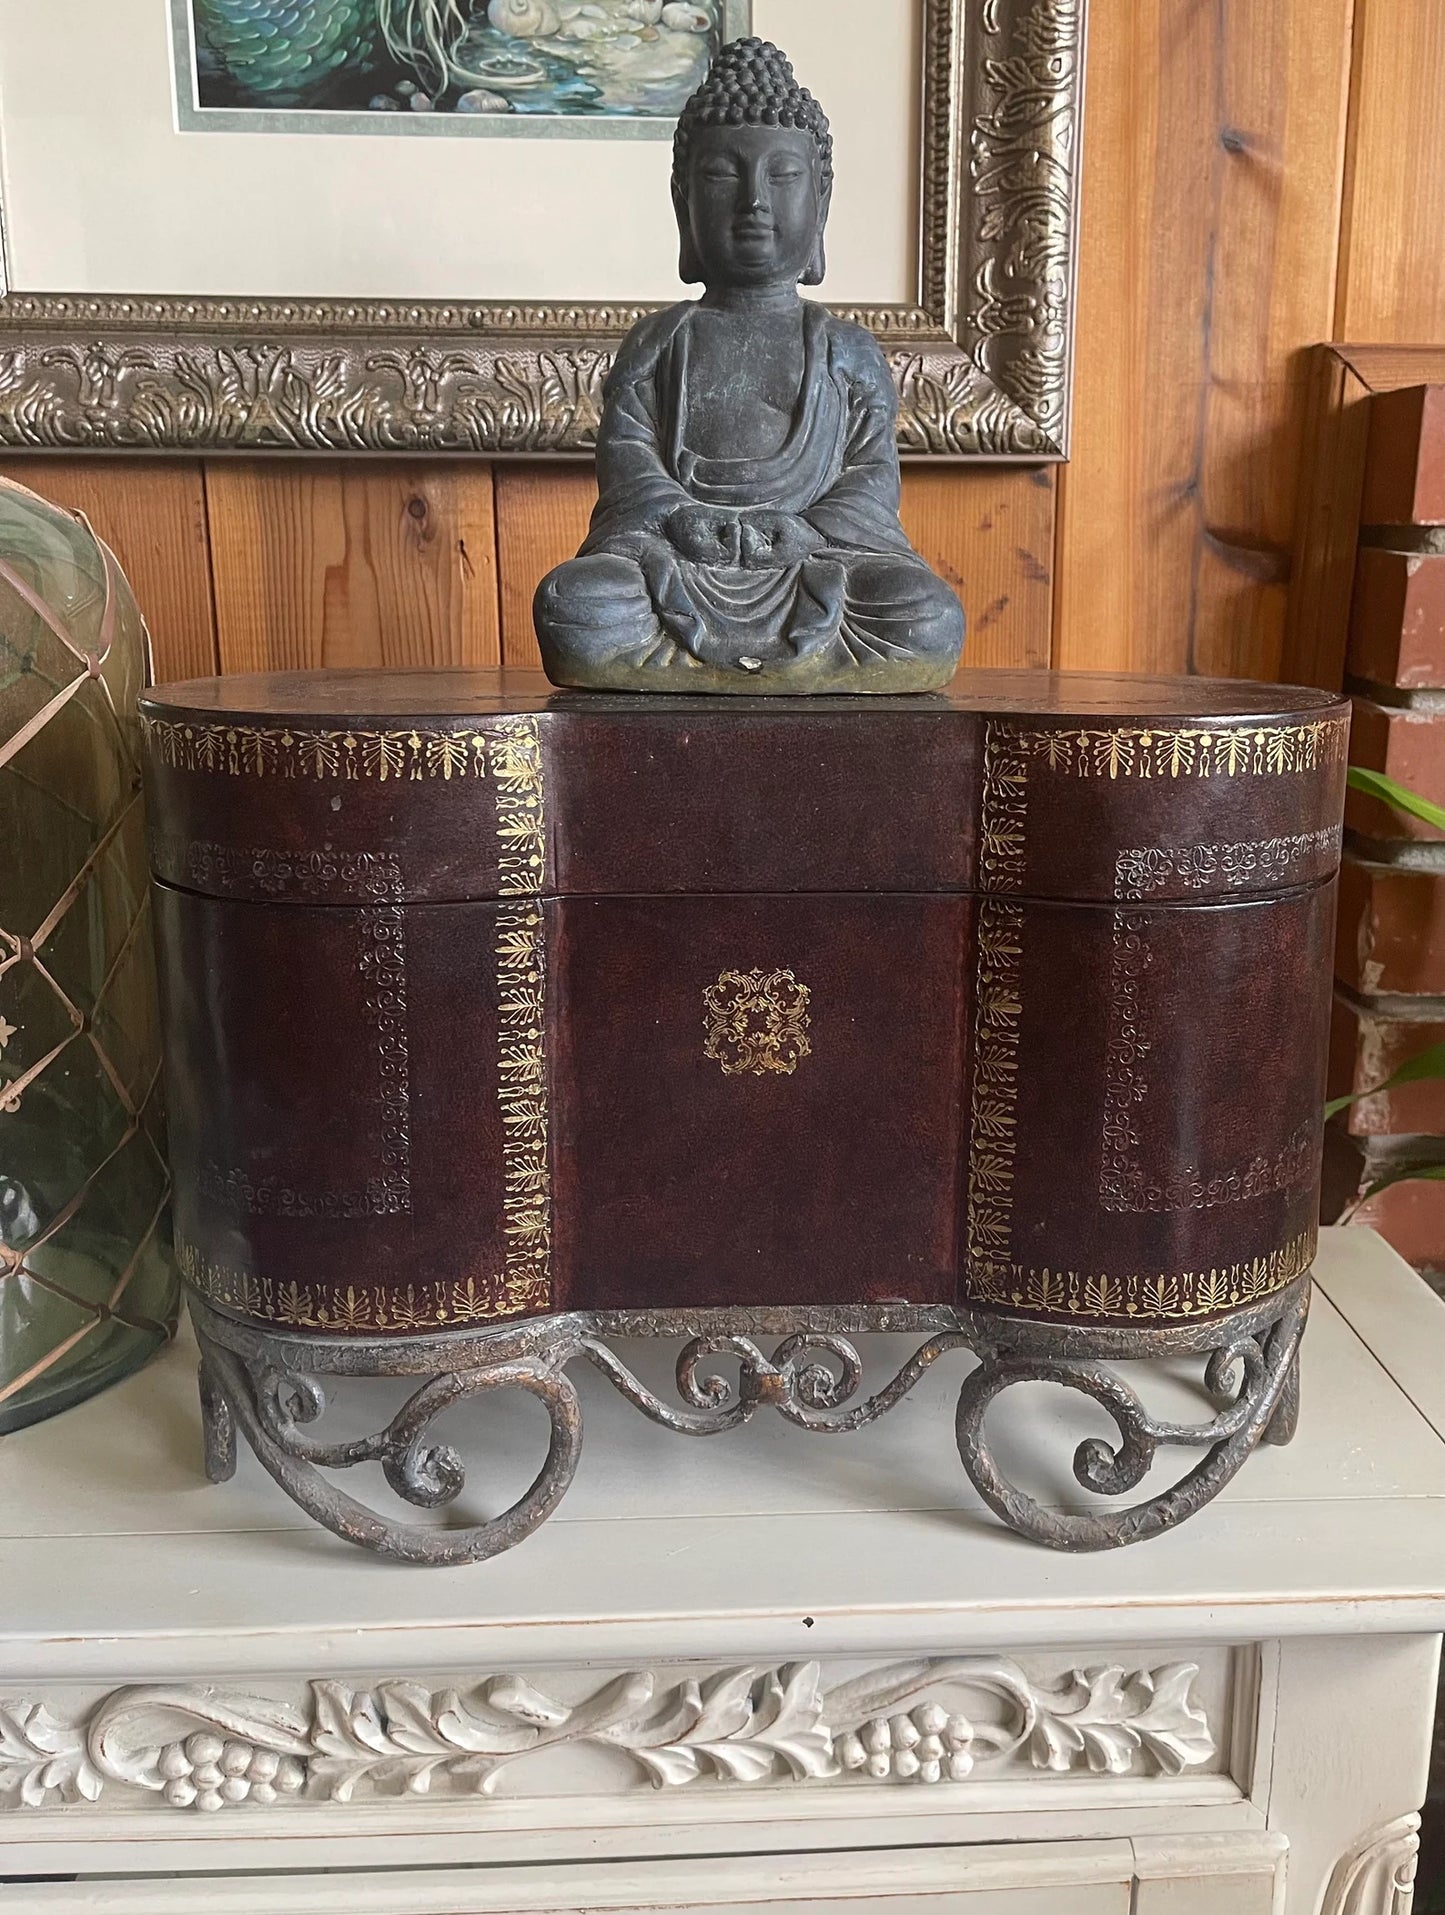 Handsome Large and Heavy Leather and Metal Vintage Box, 100 percent Shy Wolf Foundation Donation, Bodhi Vintage